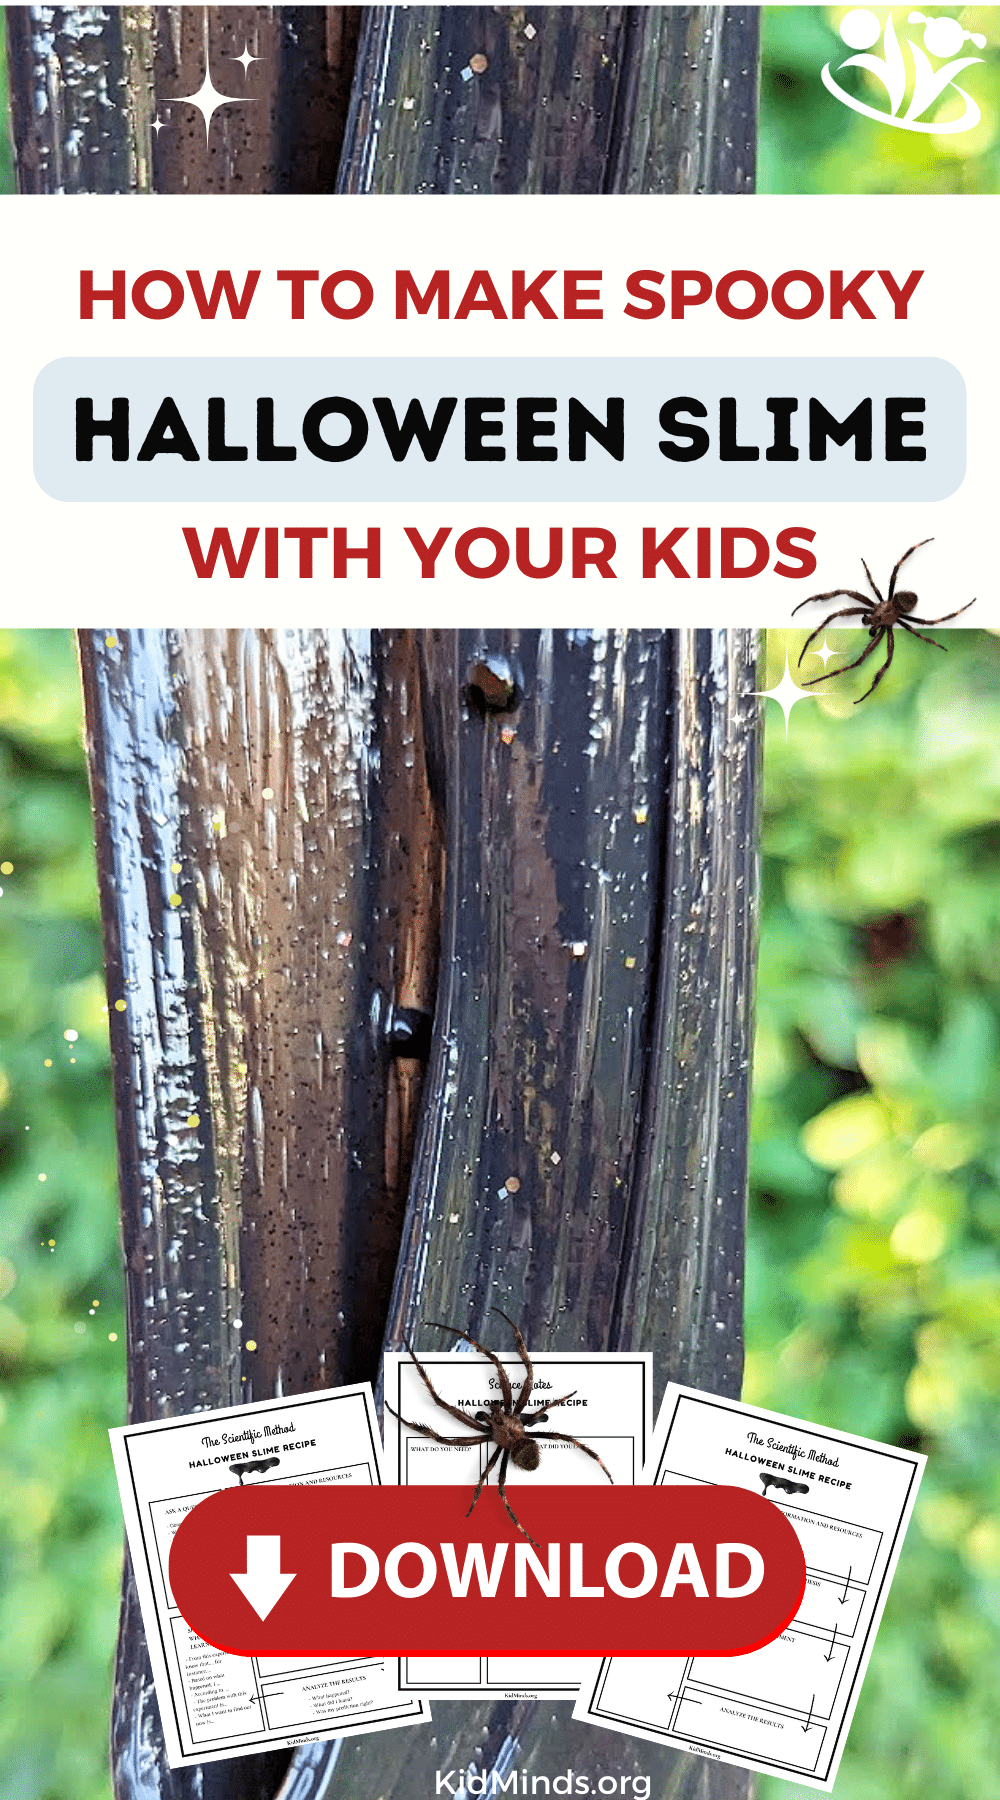 Looking to add a touch of spooky fun to your Halloween festivities? Look no further! In this article, we'll show you how to create a delightfully creepy concoction that will keep your kids entertained for hours: spooky Halloween slime.  #kidsactivities #sensoryplay #Halloween #spookyslime #slime #STEM #handsonlearning #earlyeducation